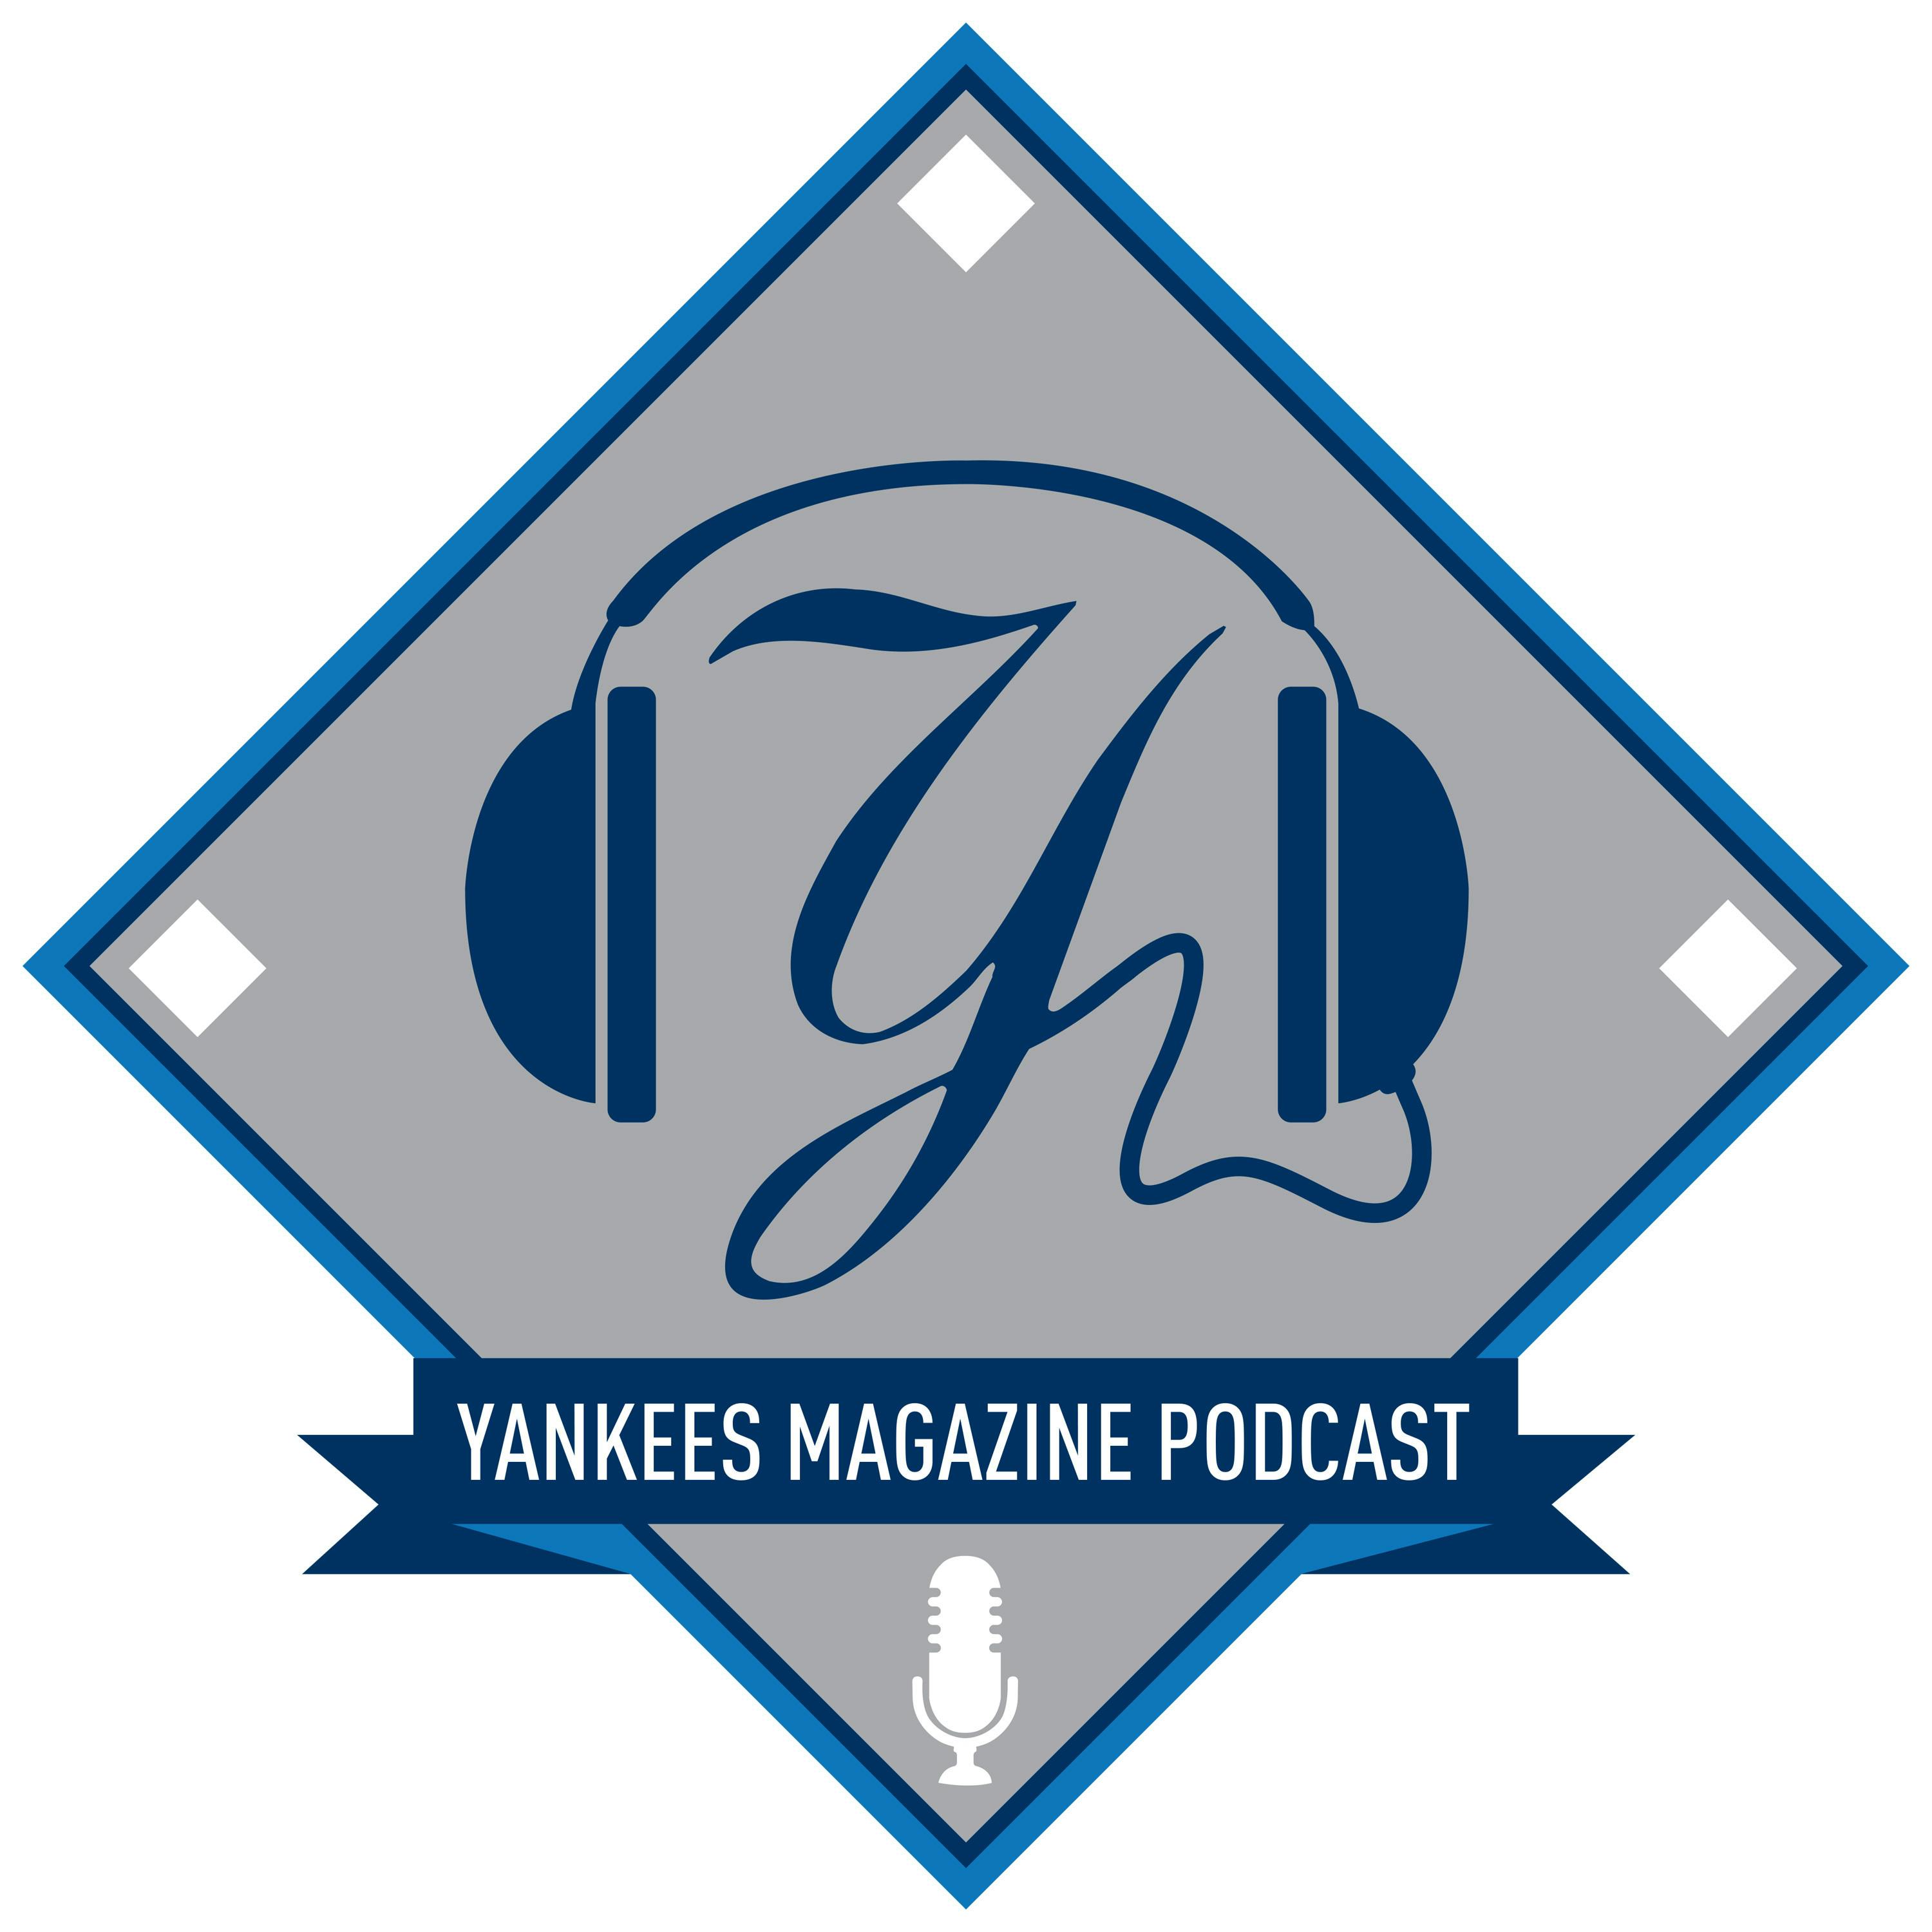 Yankees Magazine Podcast: Red Carpet Edition — Justin Hartley